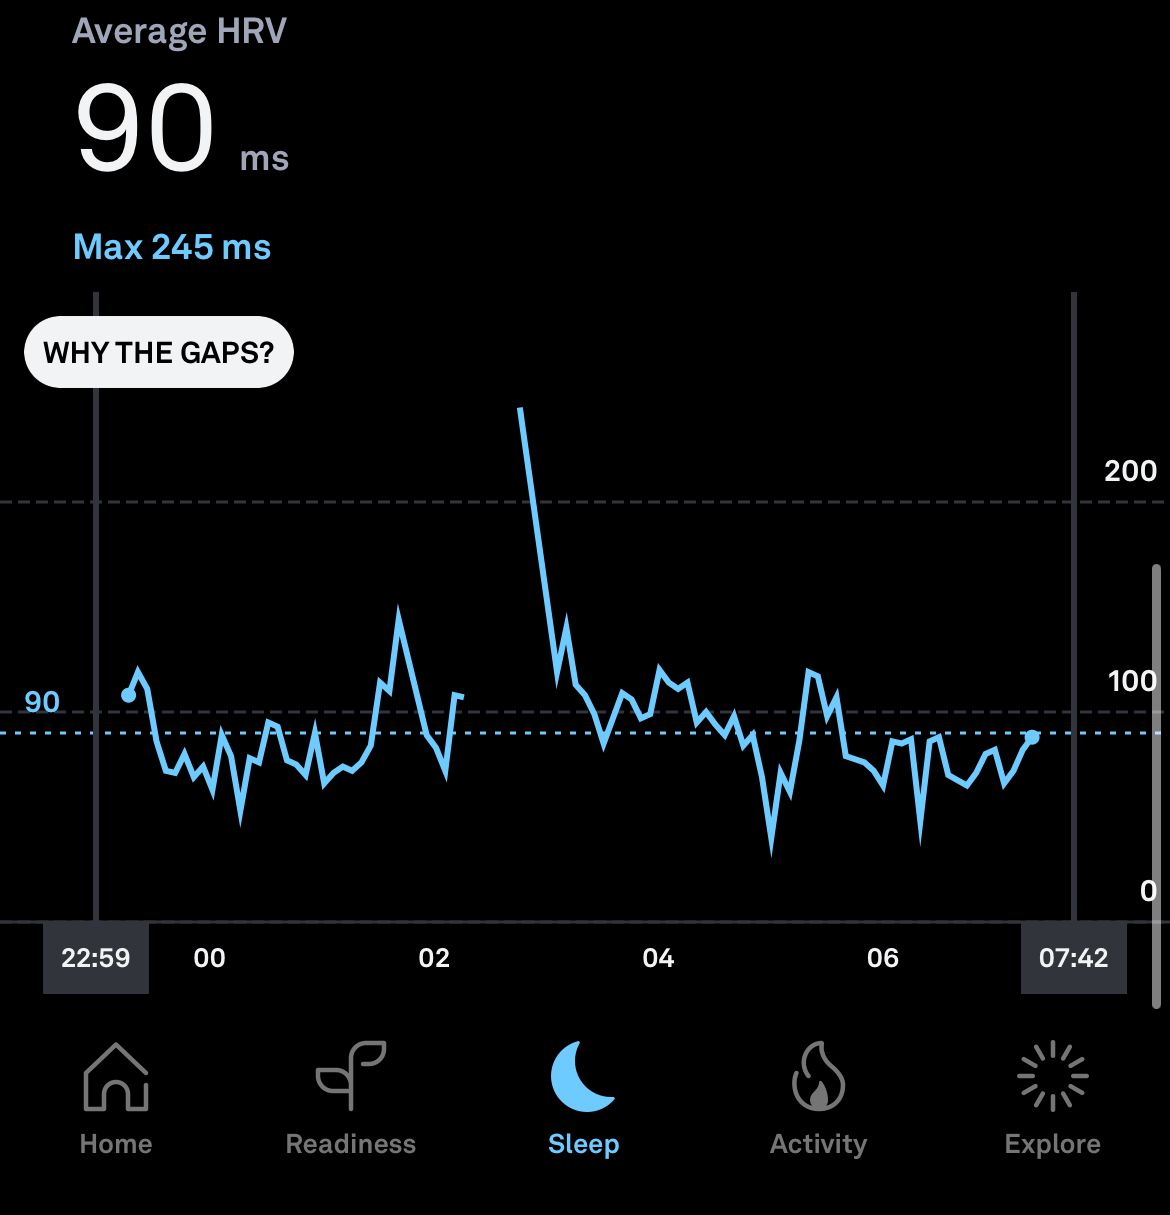 Ōura's HRV graph showing a probably erroneous high after a loss of signal